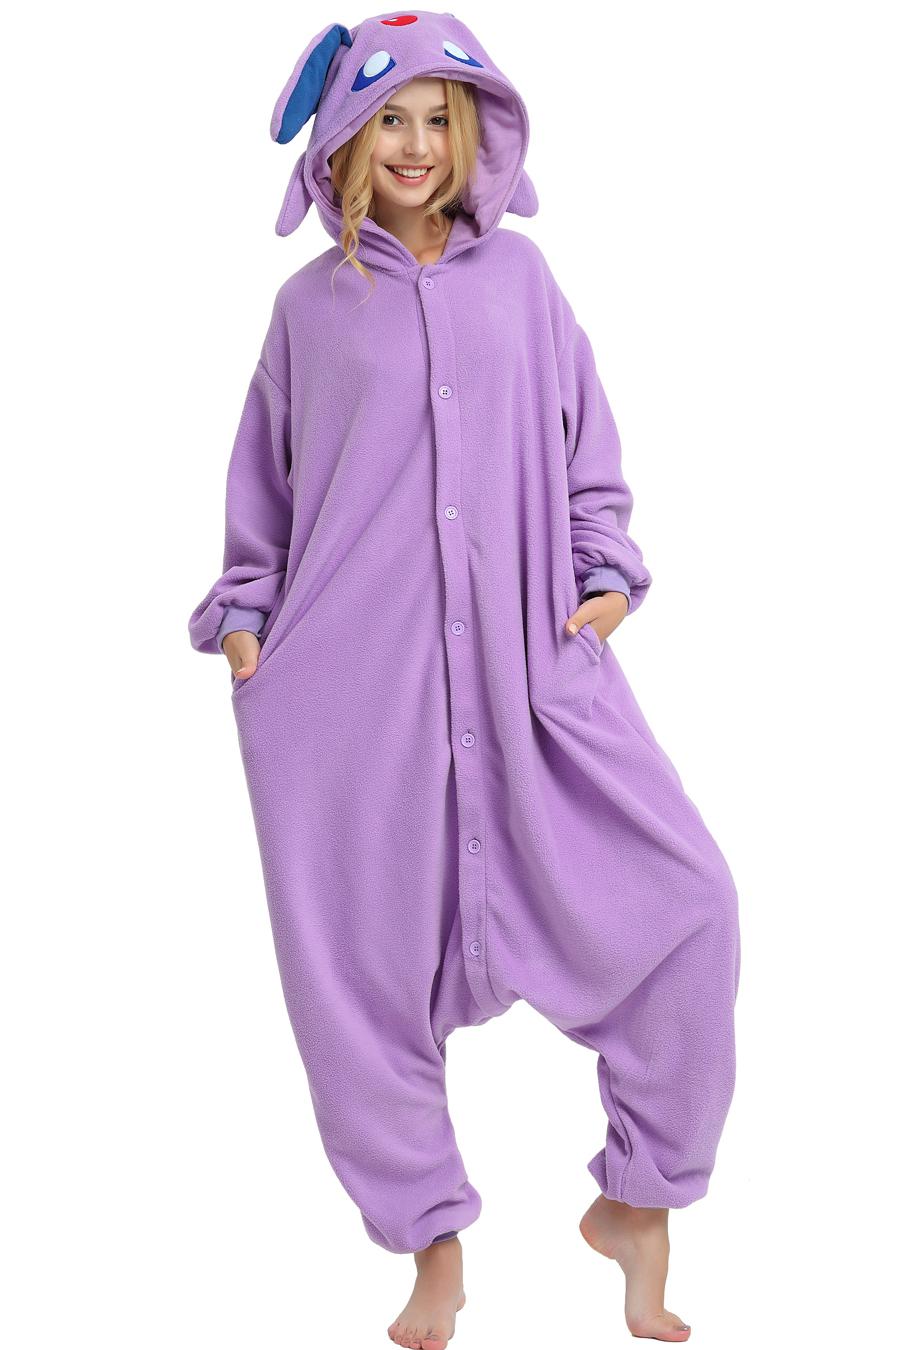 Pokemon Espeon Onesie For Adults and Teenagers